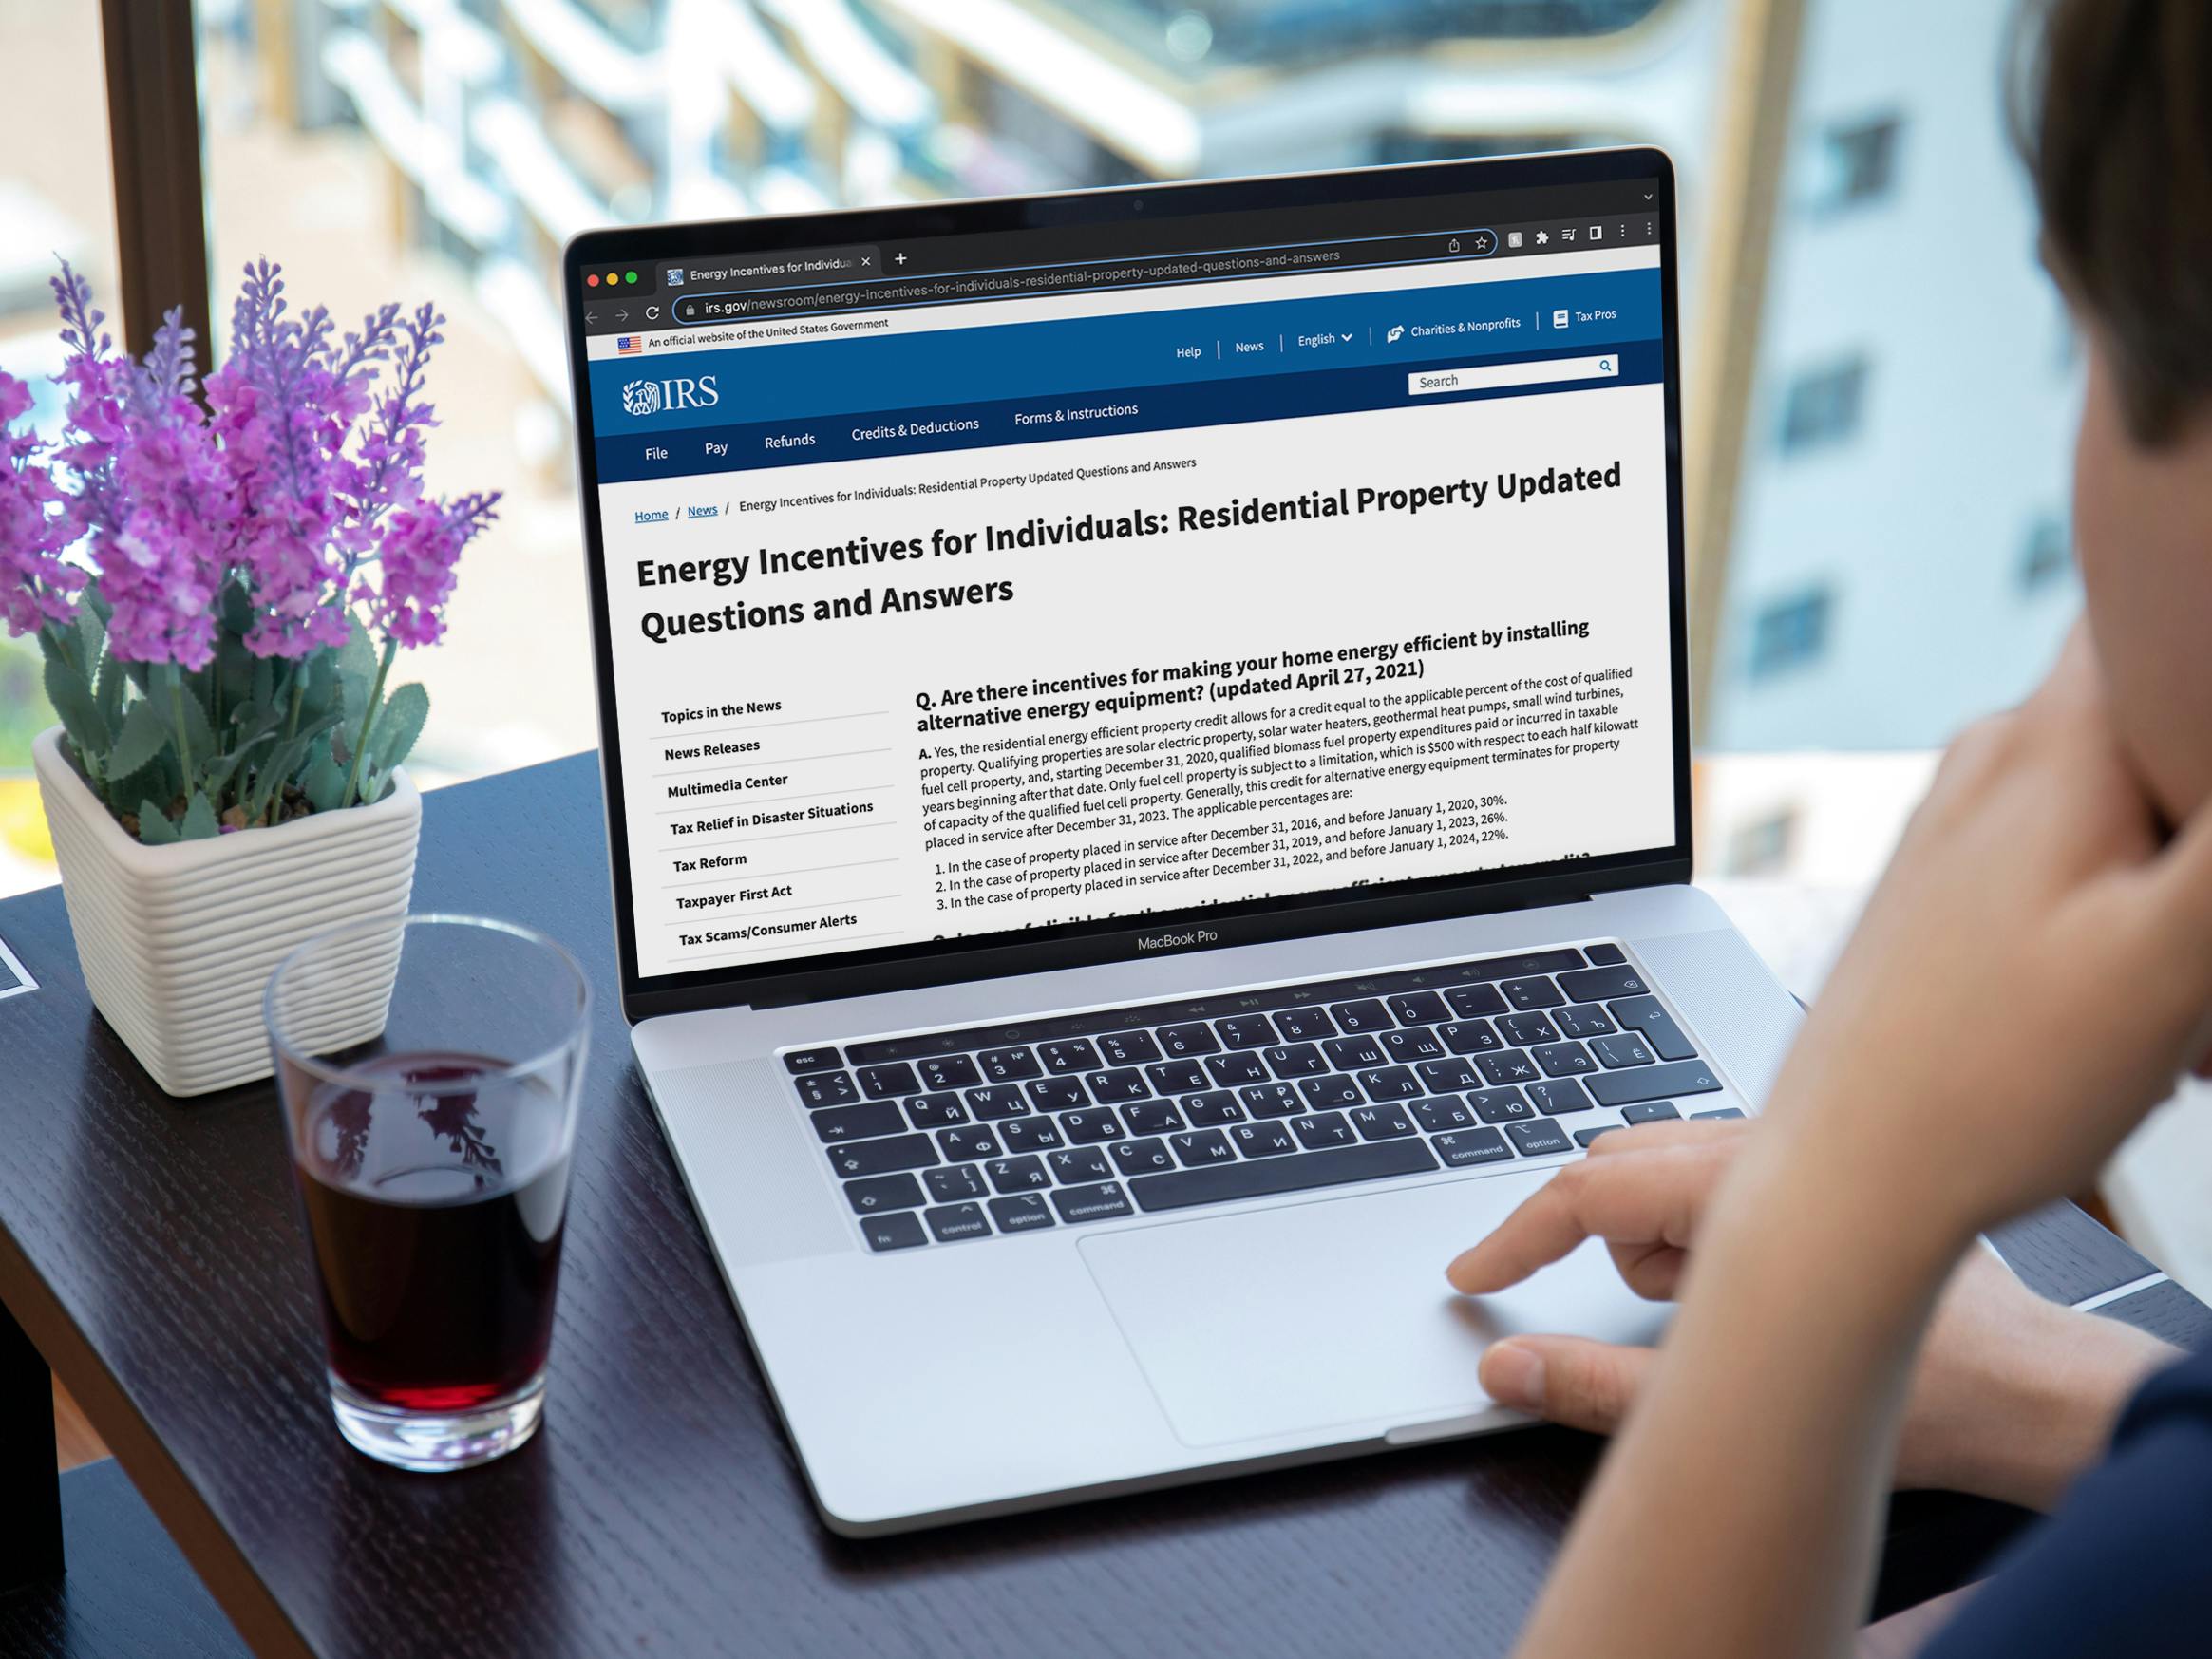 A person using a laptop displaying the IRS website's page for Energy Incentives for Individuals: Residential Property Updated Questions and Answers